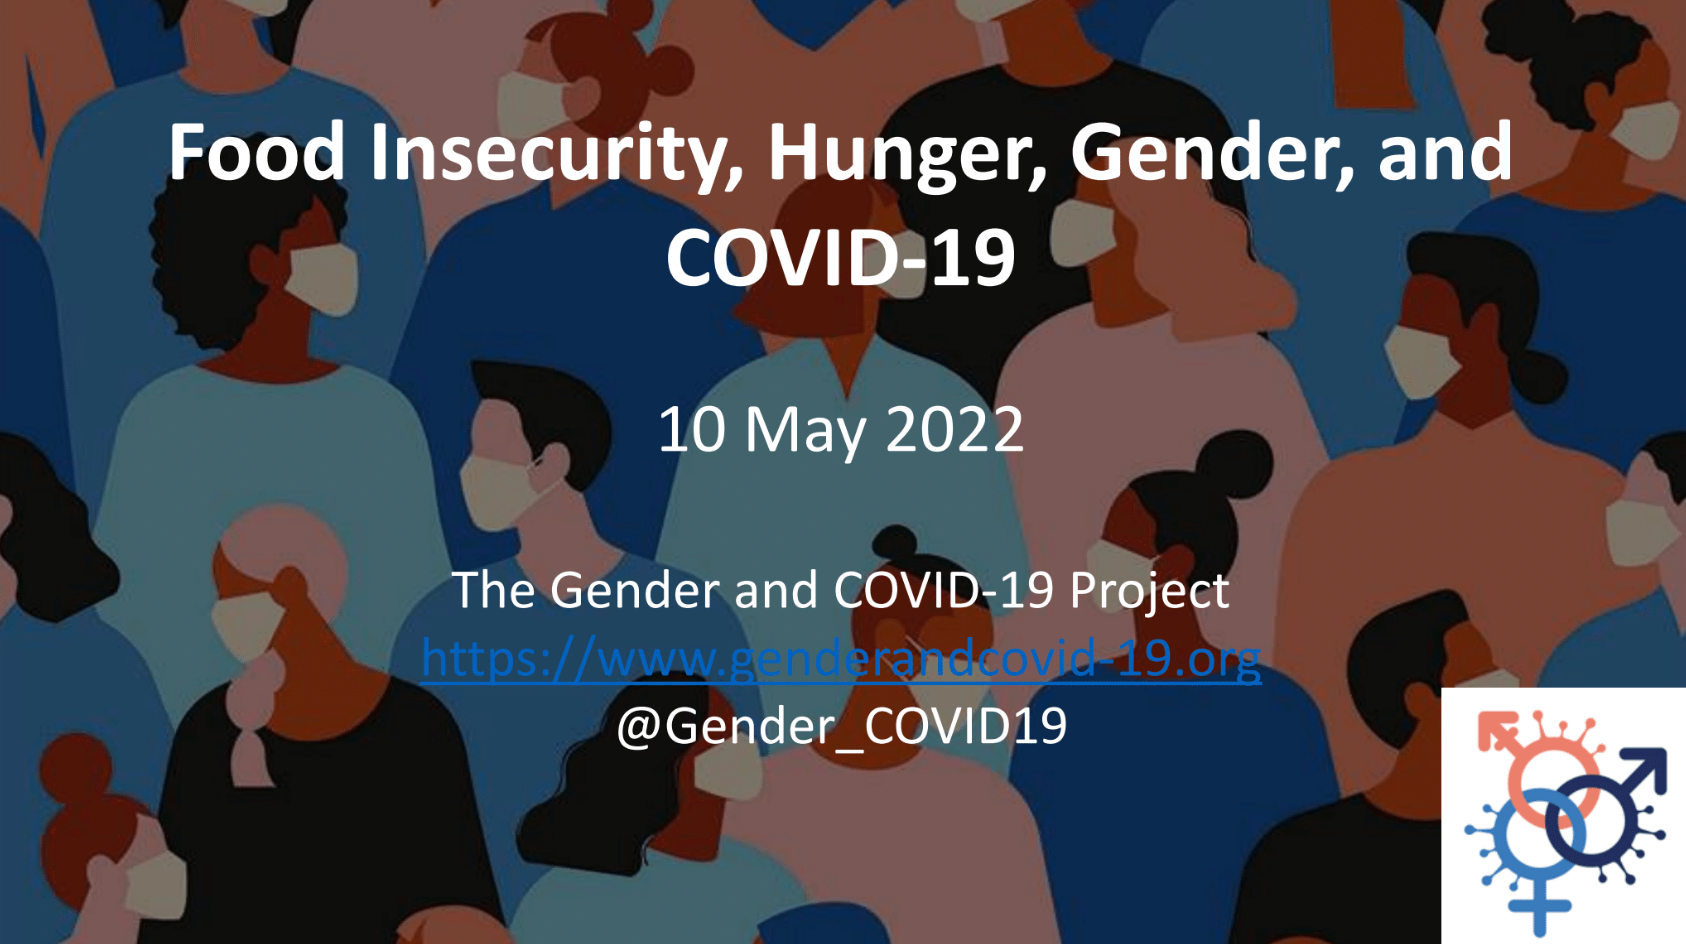 Food Insecurity, Hunger, Gender and COVID-19